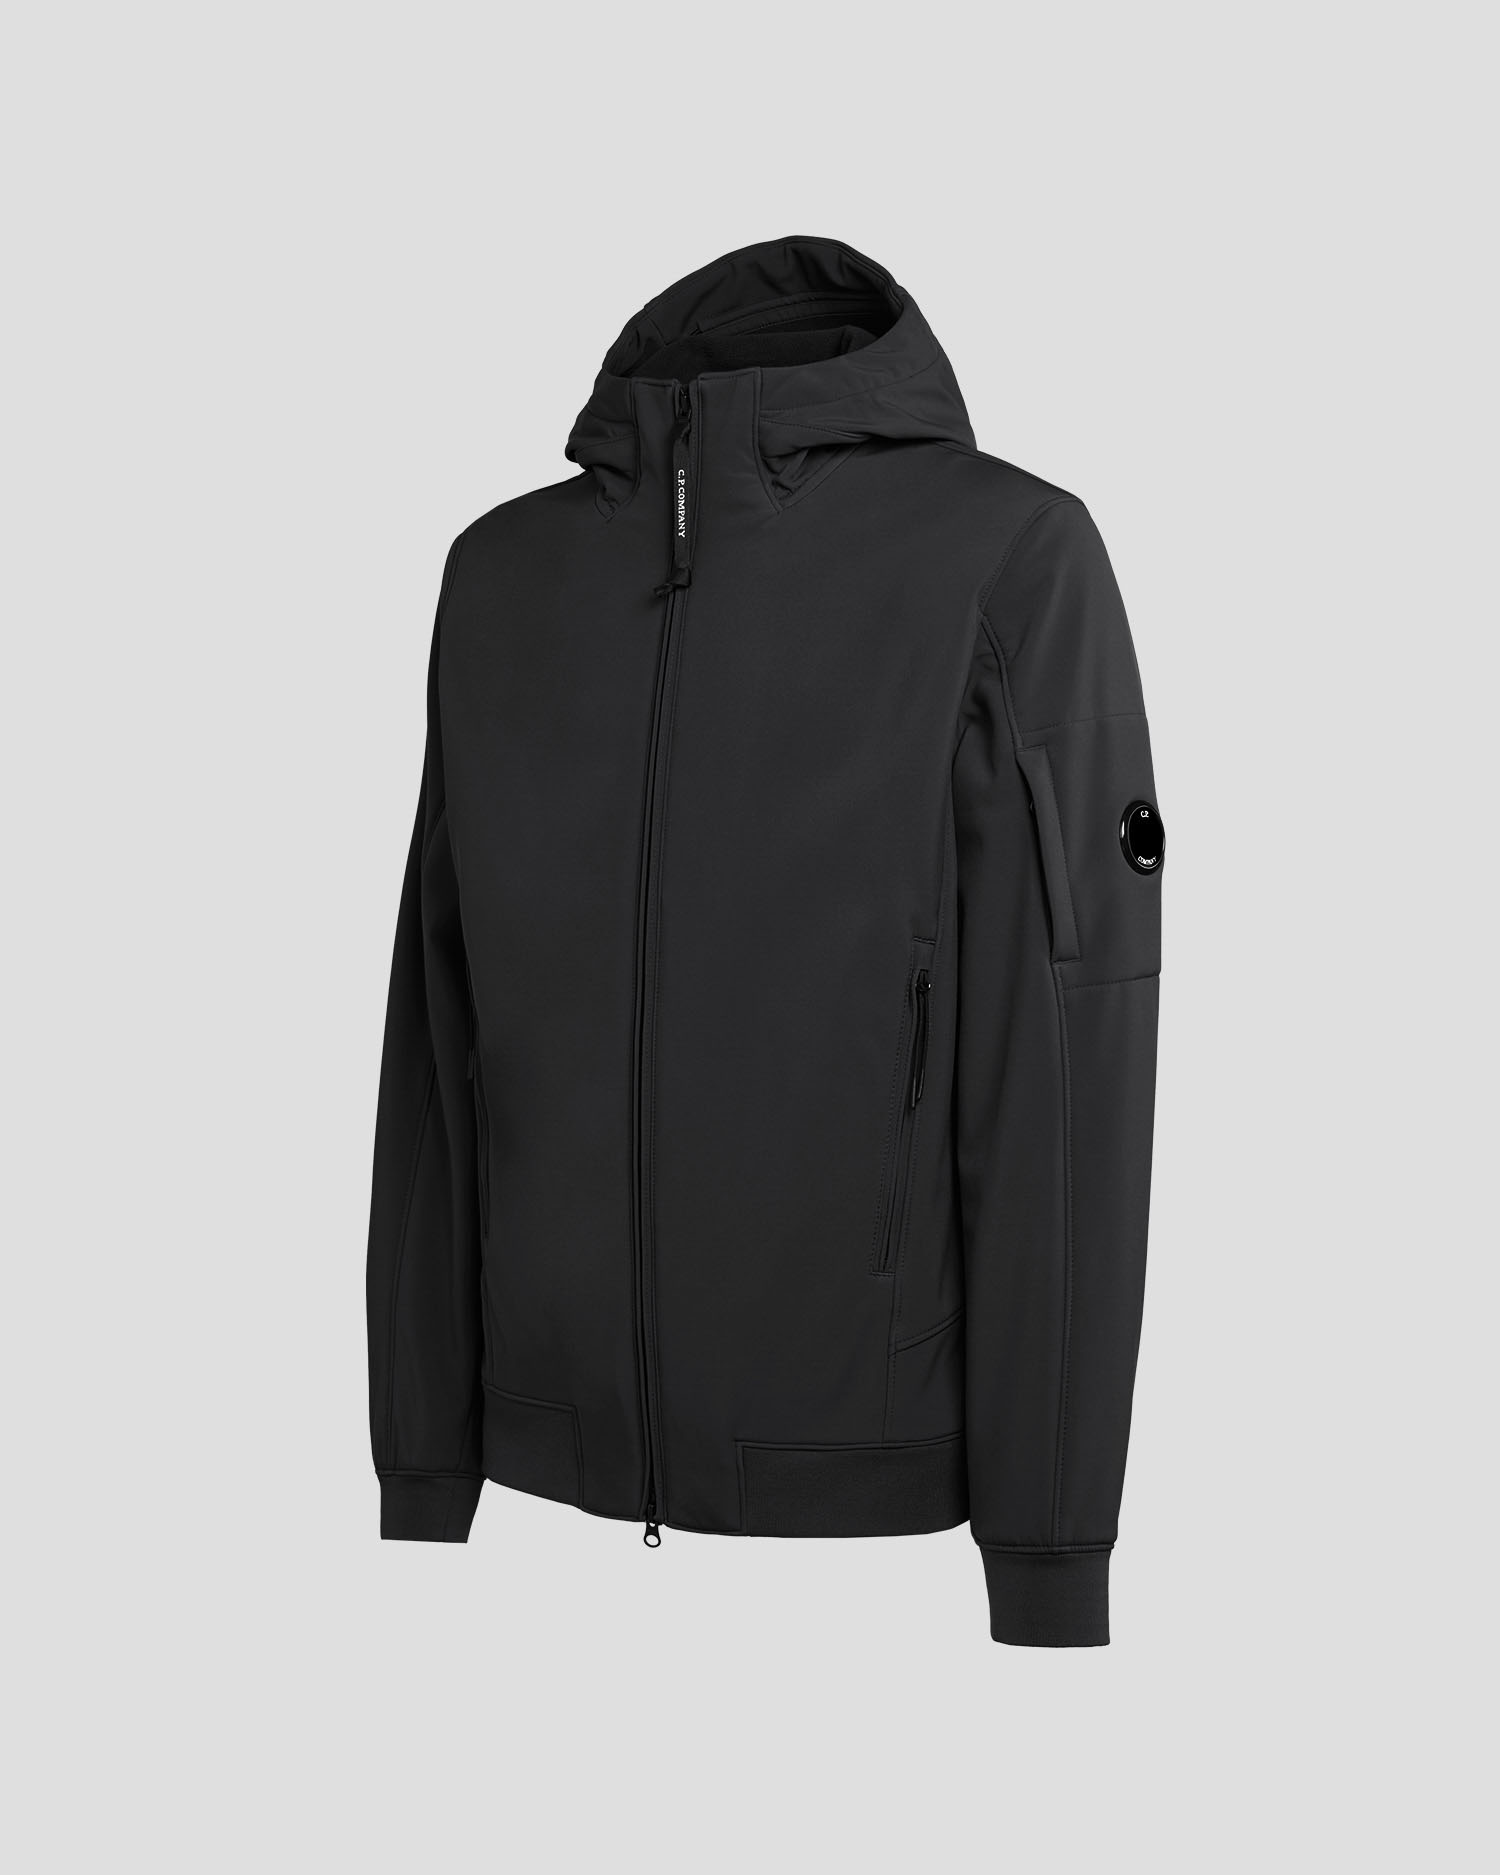 C.P. Shell-R Hooded Jacket | C.P. Company Online Store